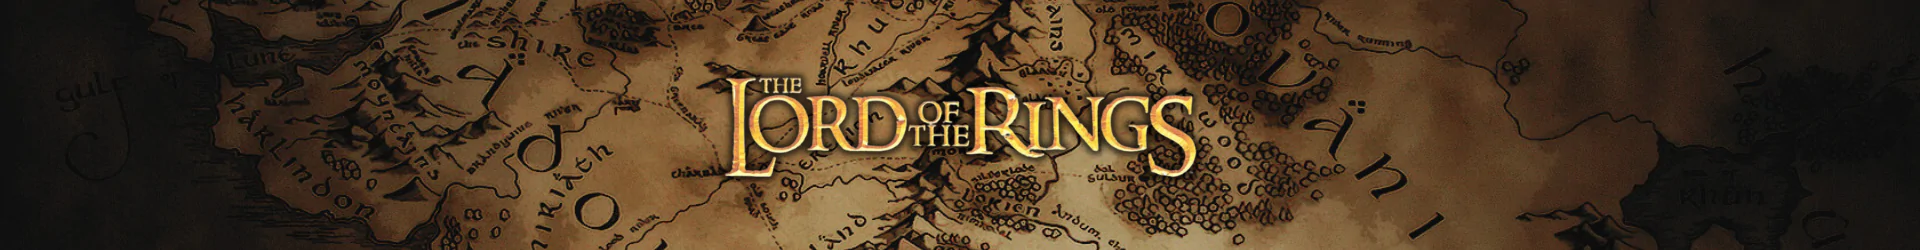 Lord of the Rings mugs banner